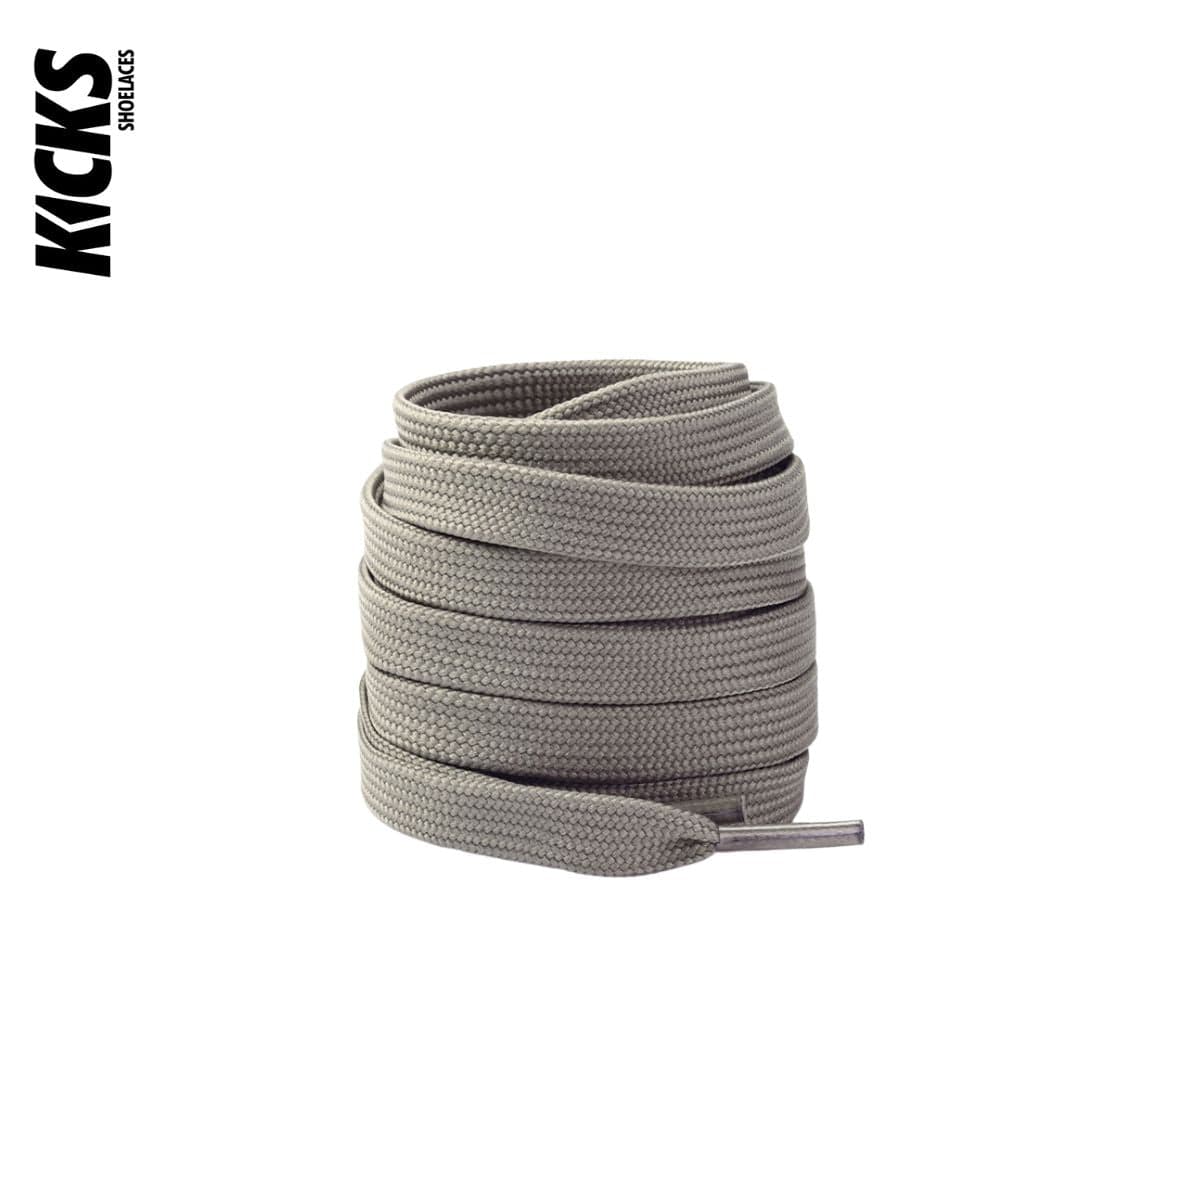 Bone Replacement Shoe Laces for Adidas NMD Sneakers by Kicks Shoelaces